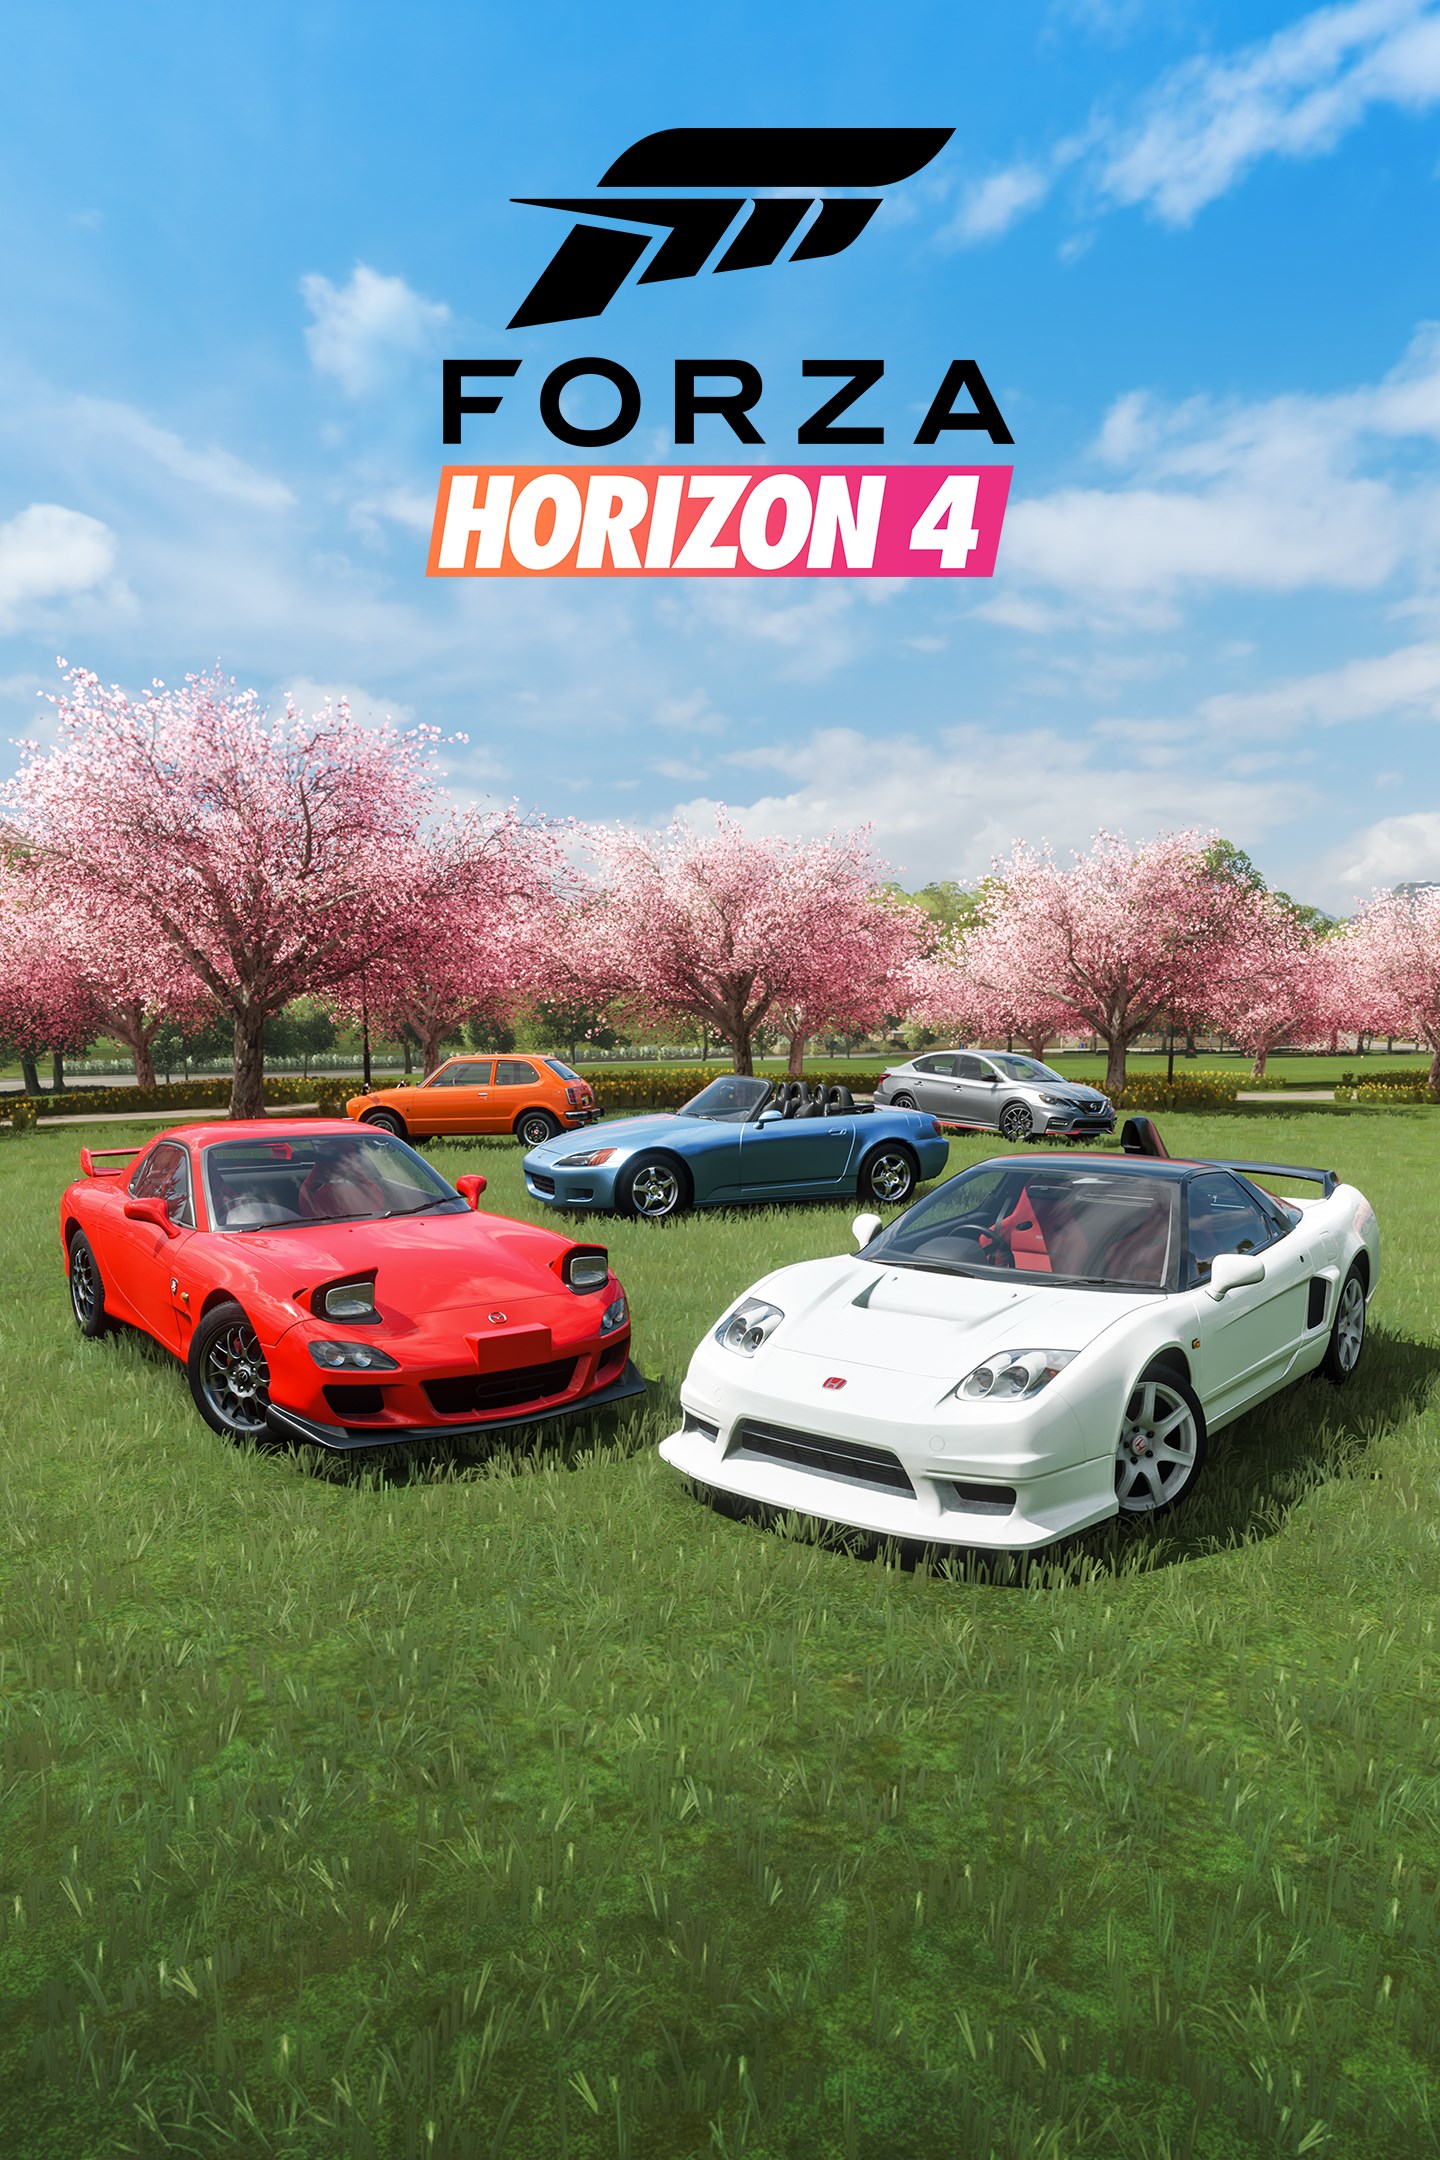 forza horizon 4 car list with pictures